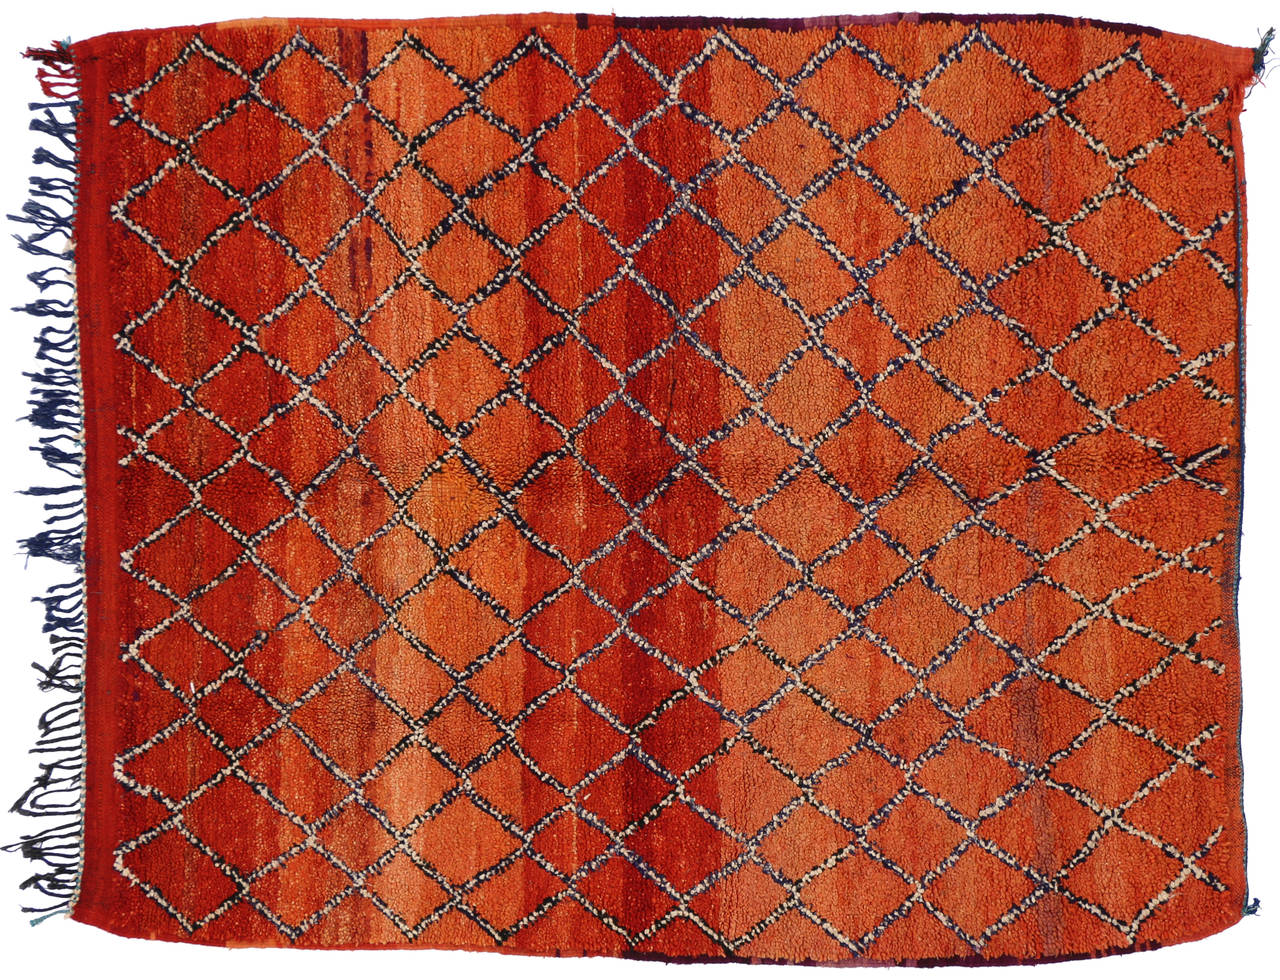 74805 Contemporary Berber Moroccan Rug with Retro Mid-Century Modern Style 05'09 x 06'11. Featuring a luminous fiery glow and a plush pile, this hand knotted wool vintage Moroccan rug astounds with its beauty. It features a diamond trellis pattern